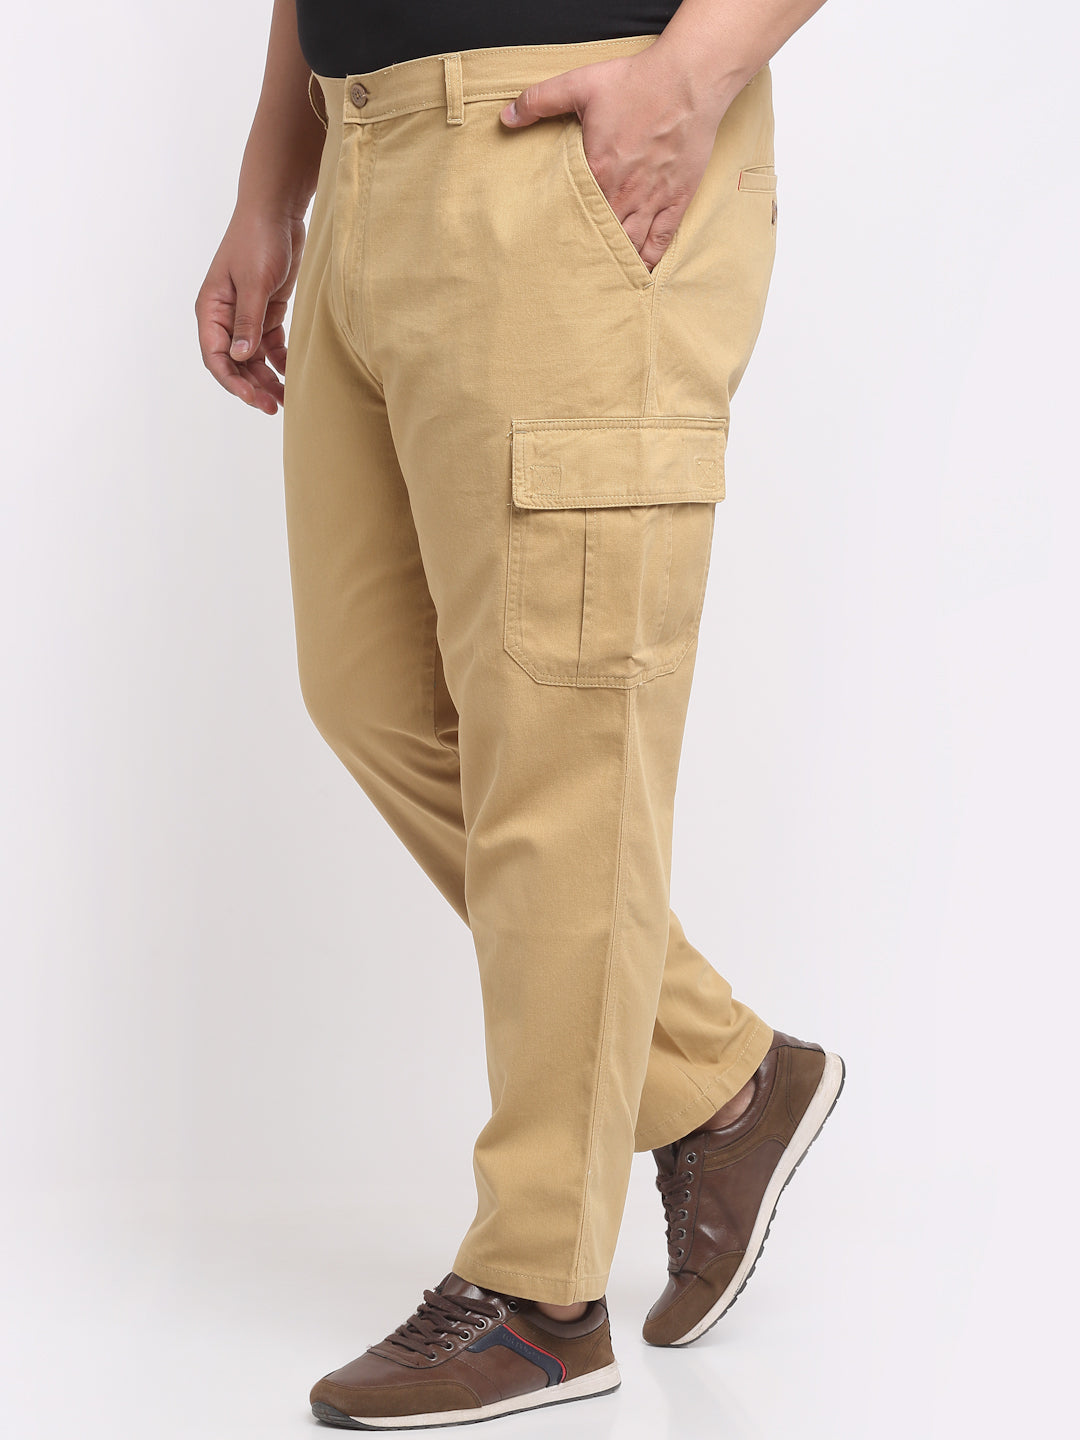 Olive Green PCS Delta Trousers | 28 to 48 Inches | Highlander Forces